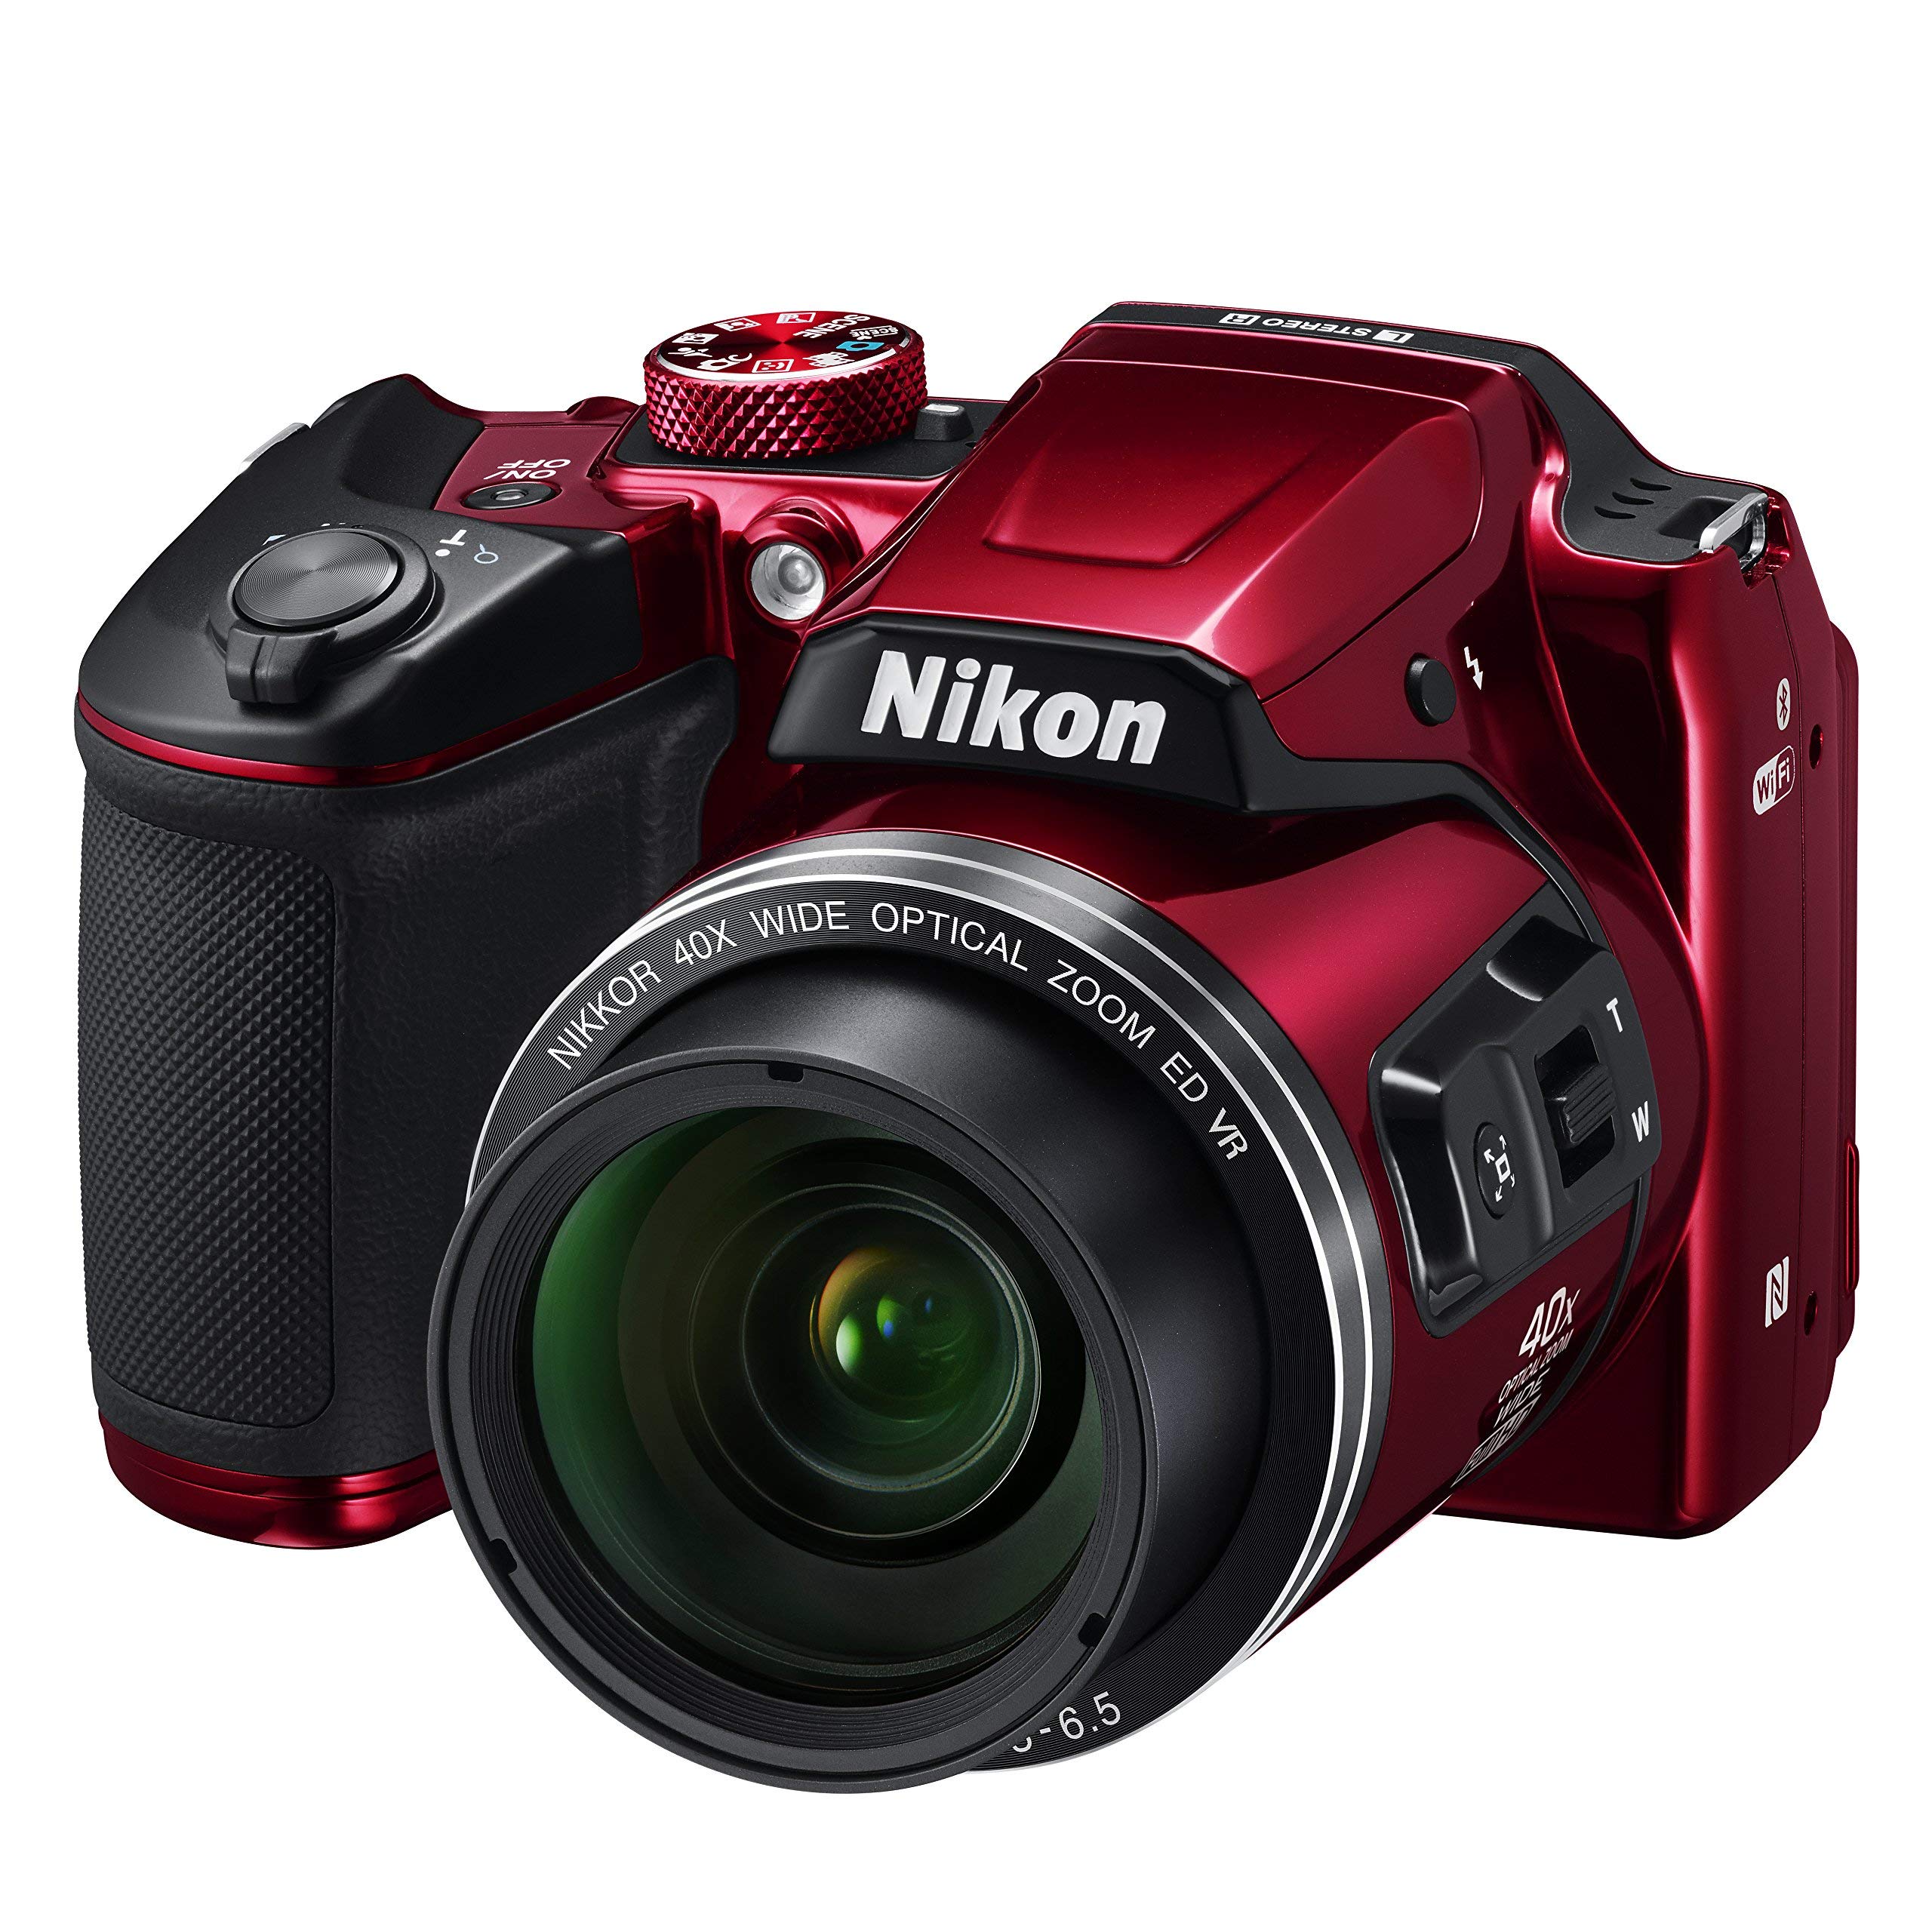 Nikon COOLPIX B500 16MP Digital Camera with 3 Inch TFT LCD Screen Nikkor Lens With 40x optical zoom wifi, Red (Renewed)